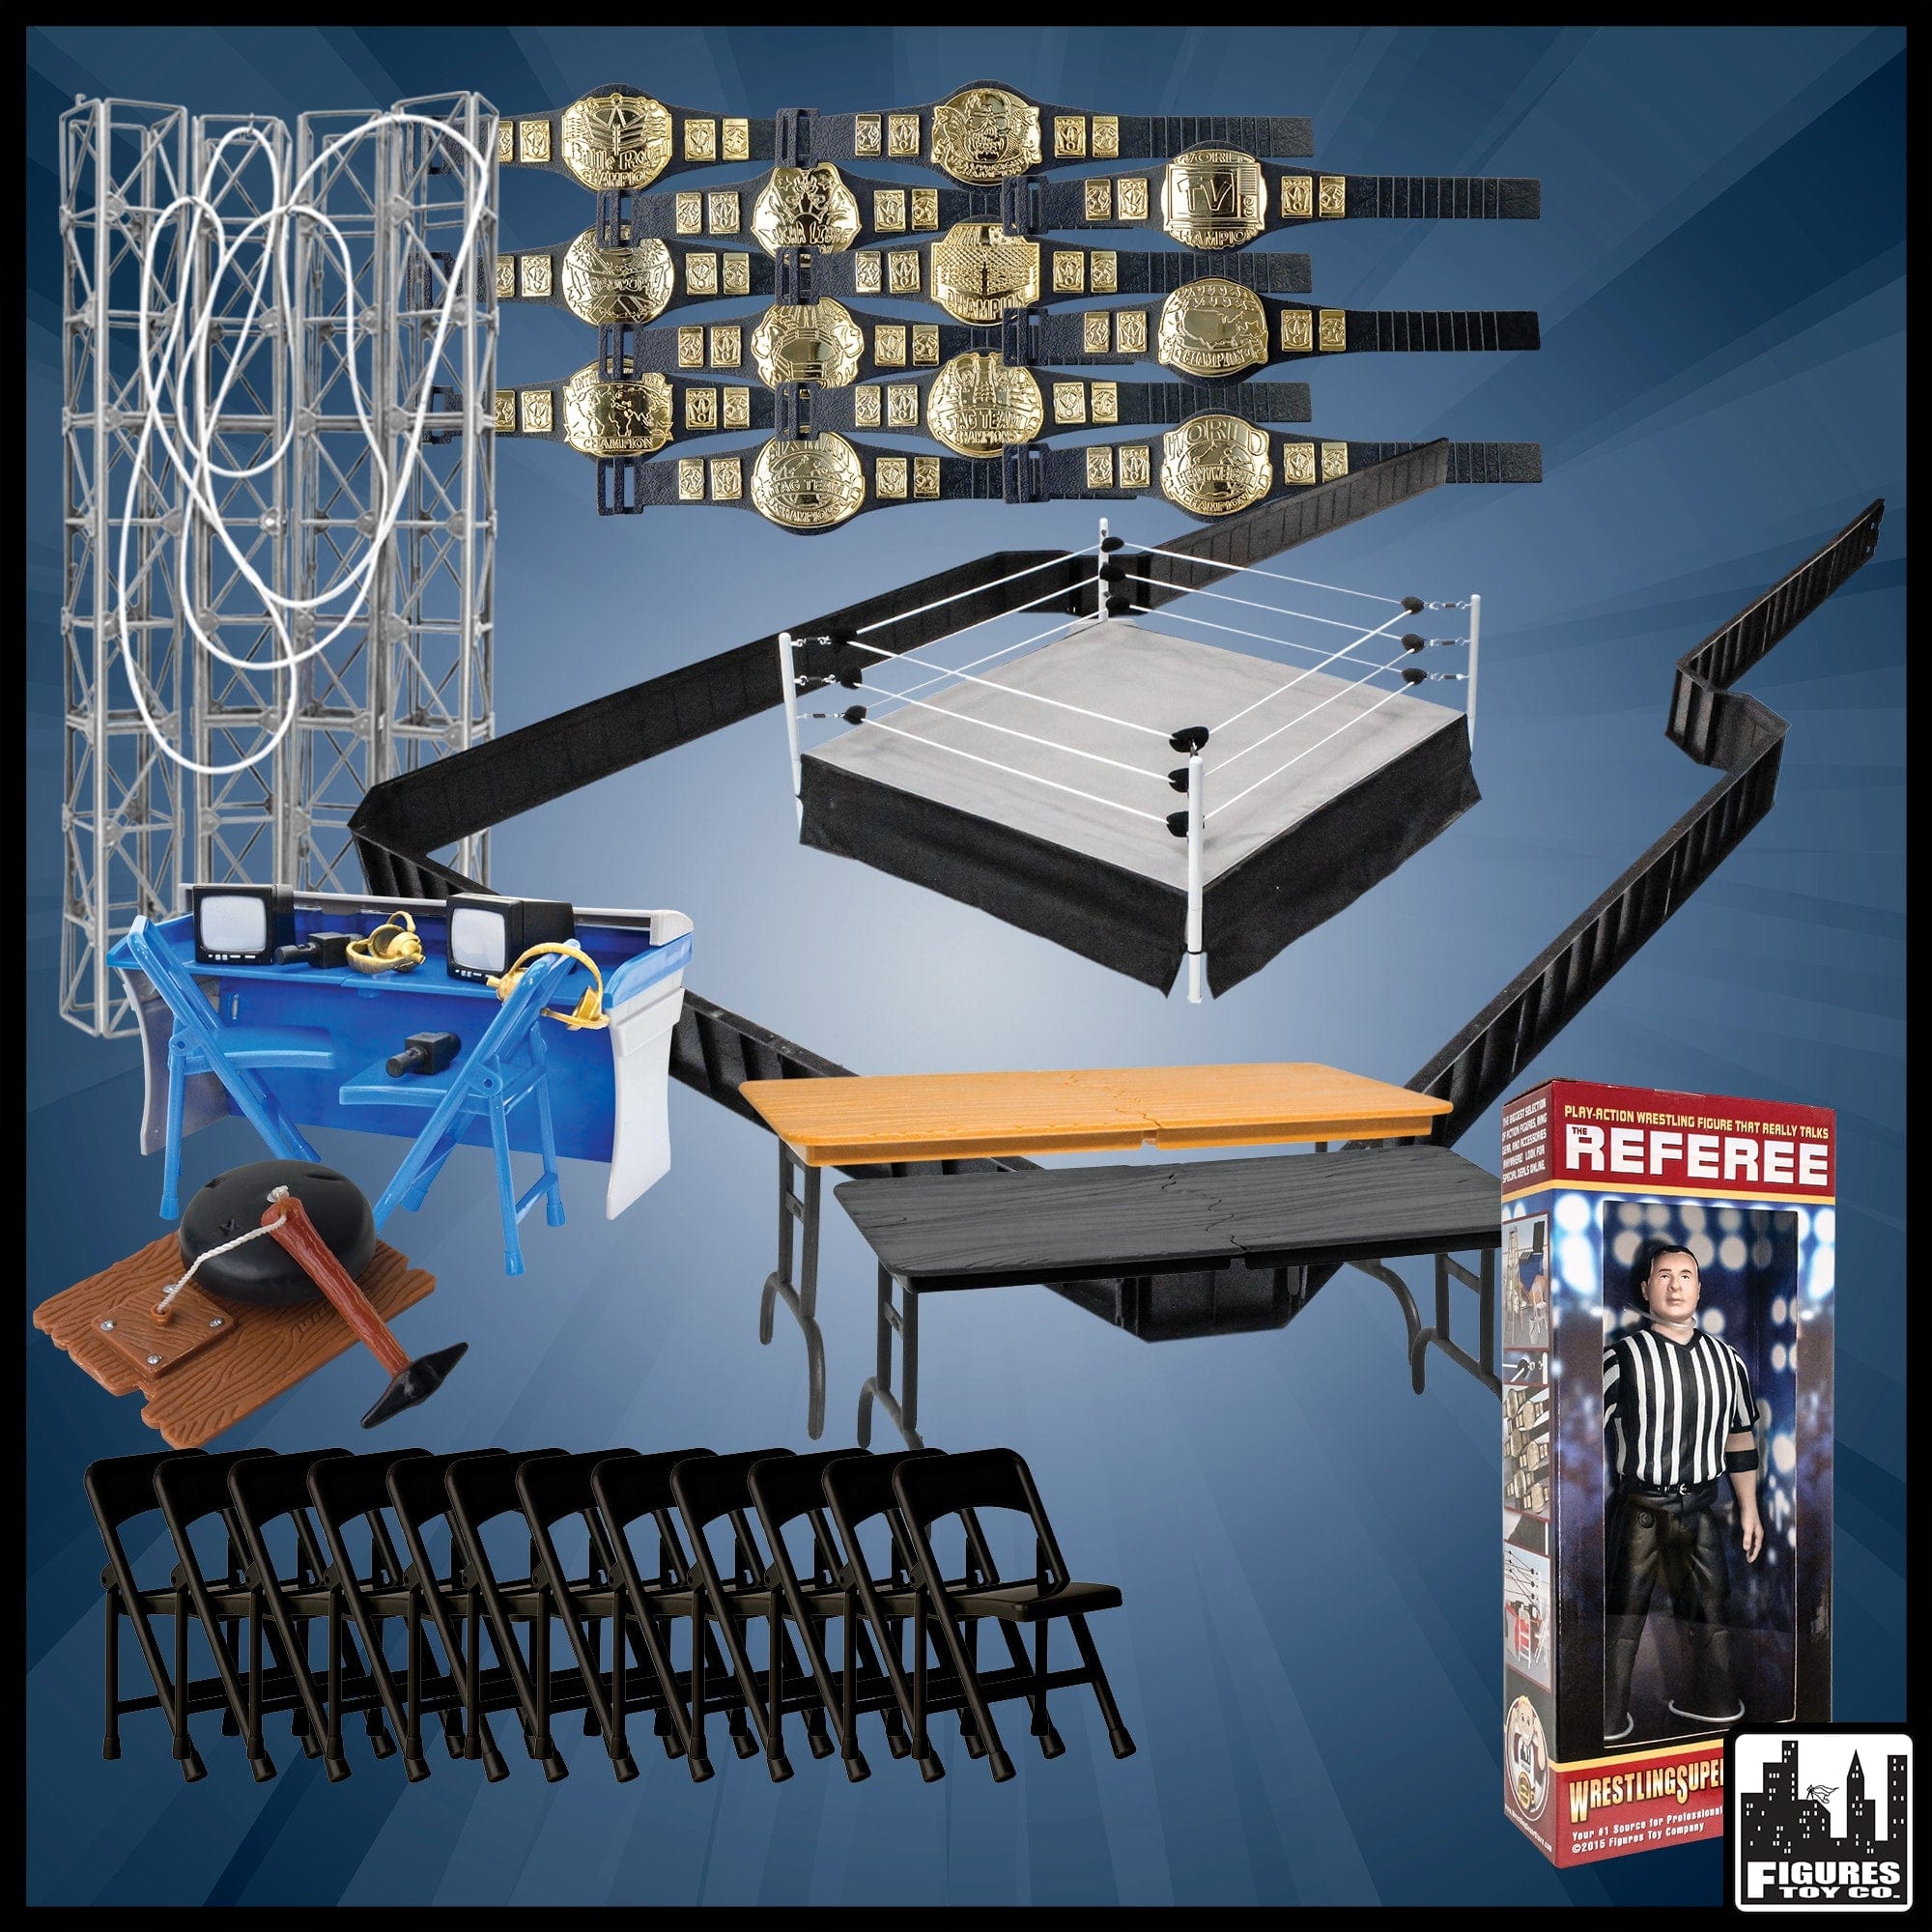 Super Deluxe Wrestling Action Figure Ring & Accessories Special Deal for WWE Wrestling Figures